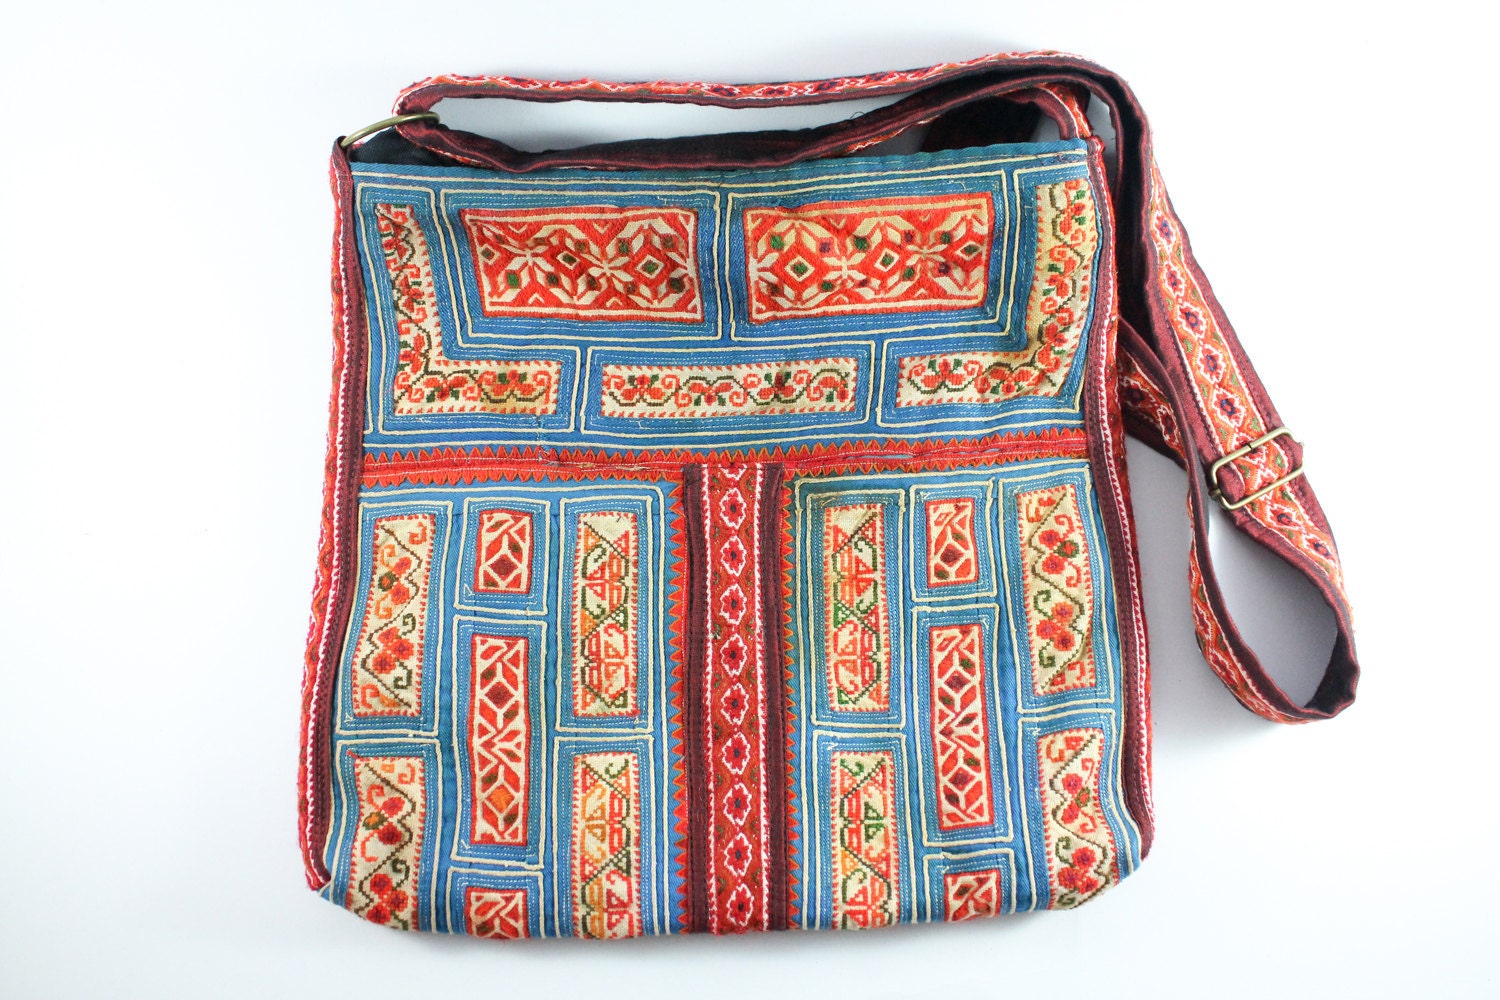 Rare blue vintage tribal cross-body bag,  Flowers pattern on Hmong hill tribe embroidery, Gypsy/bohemian style